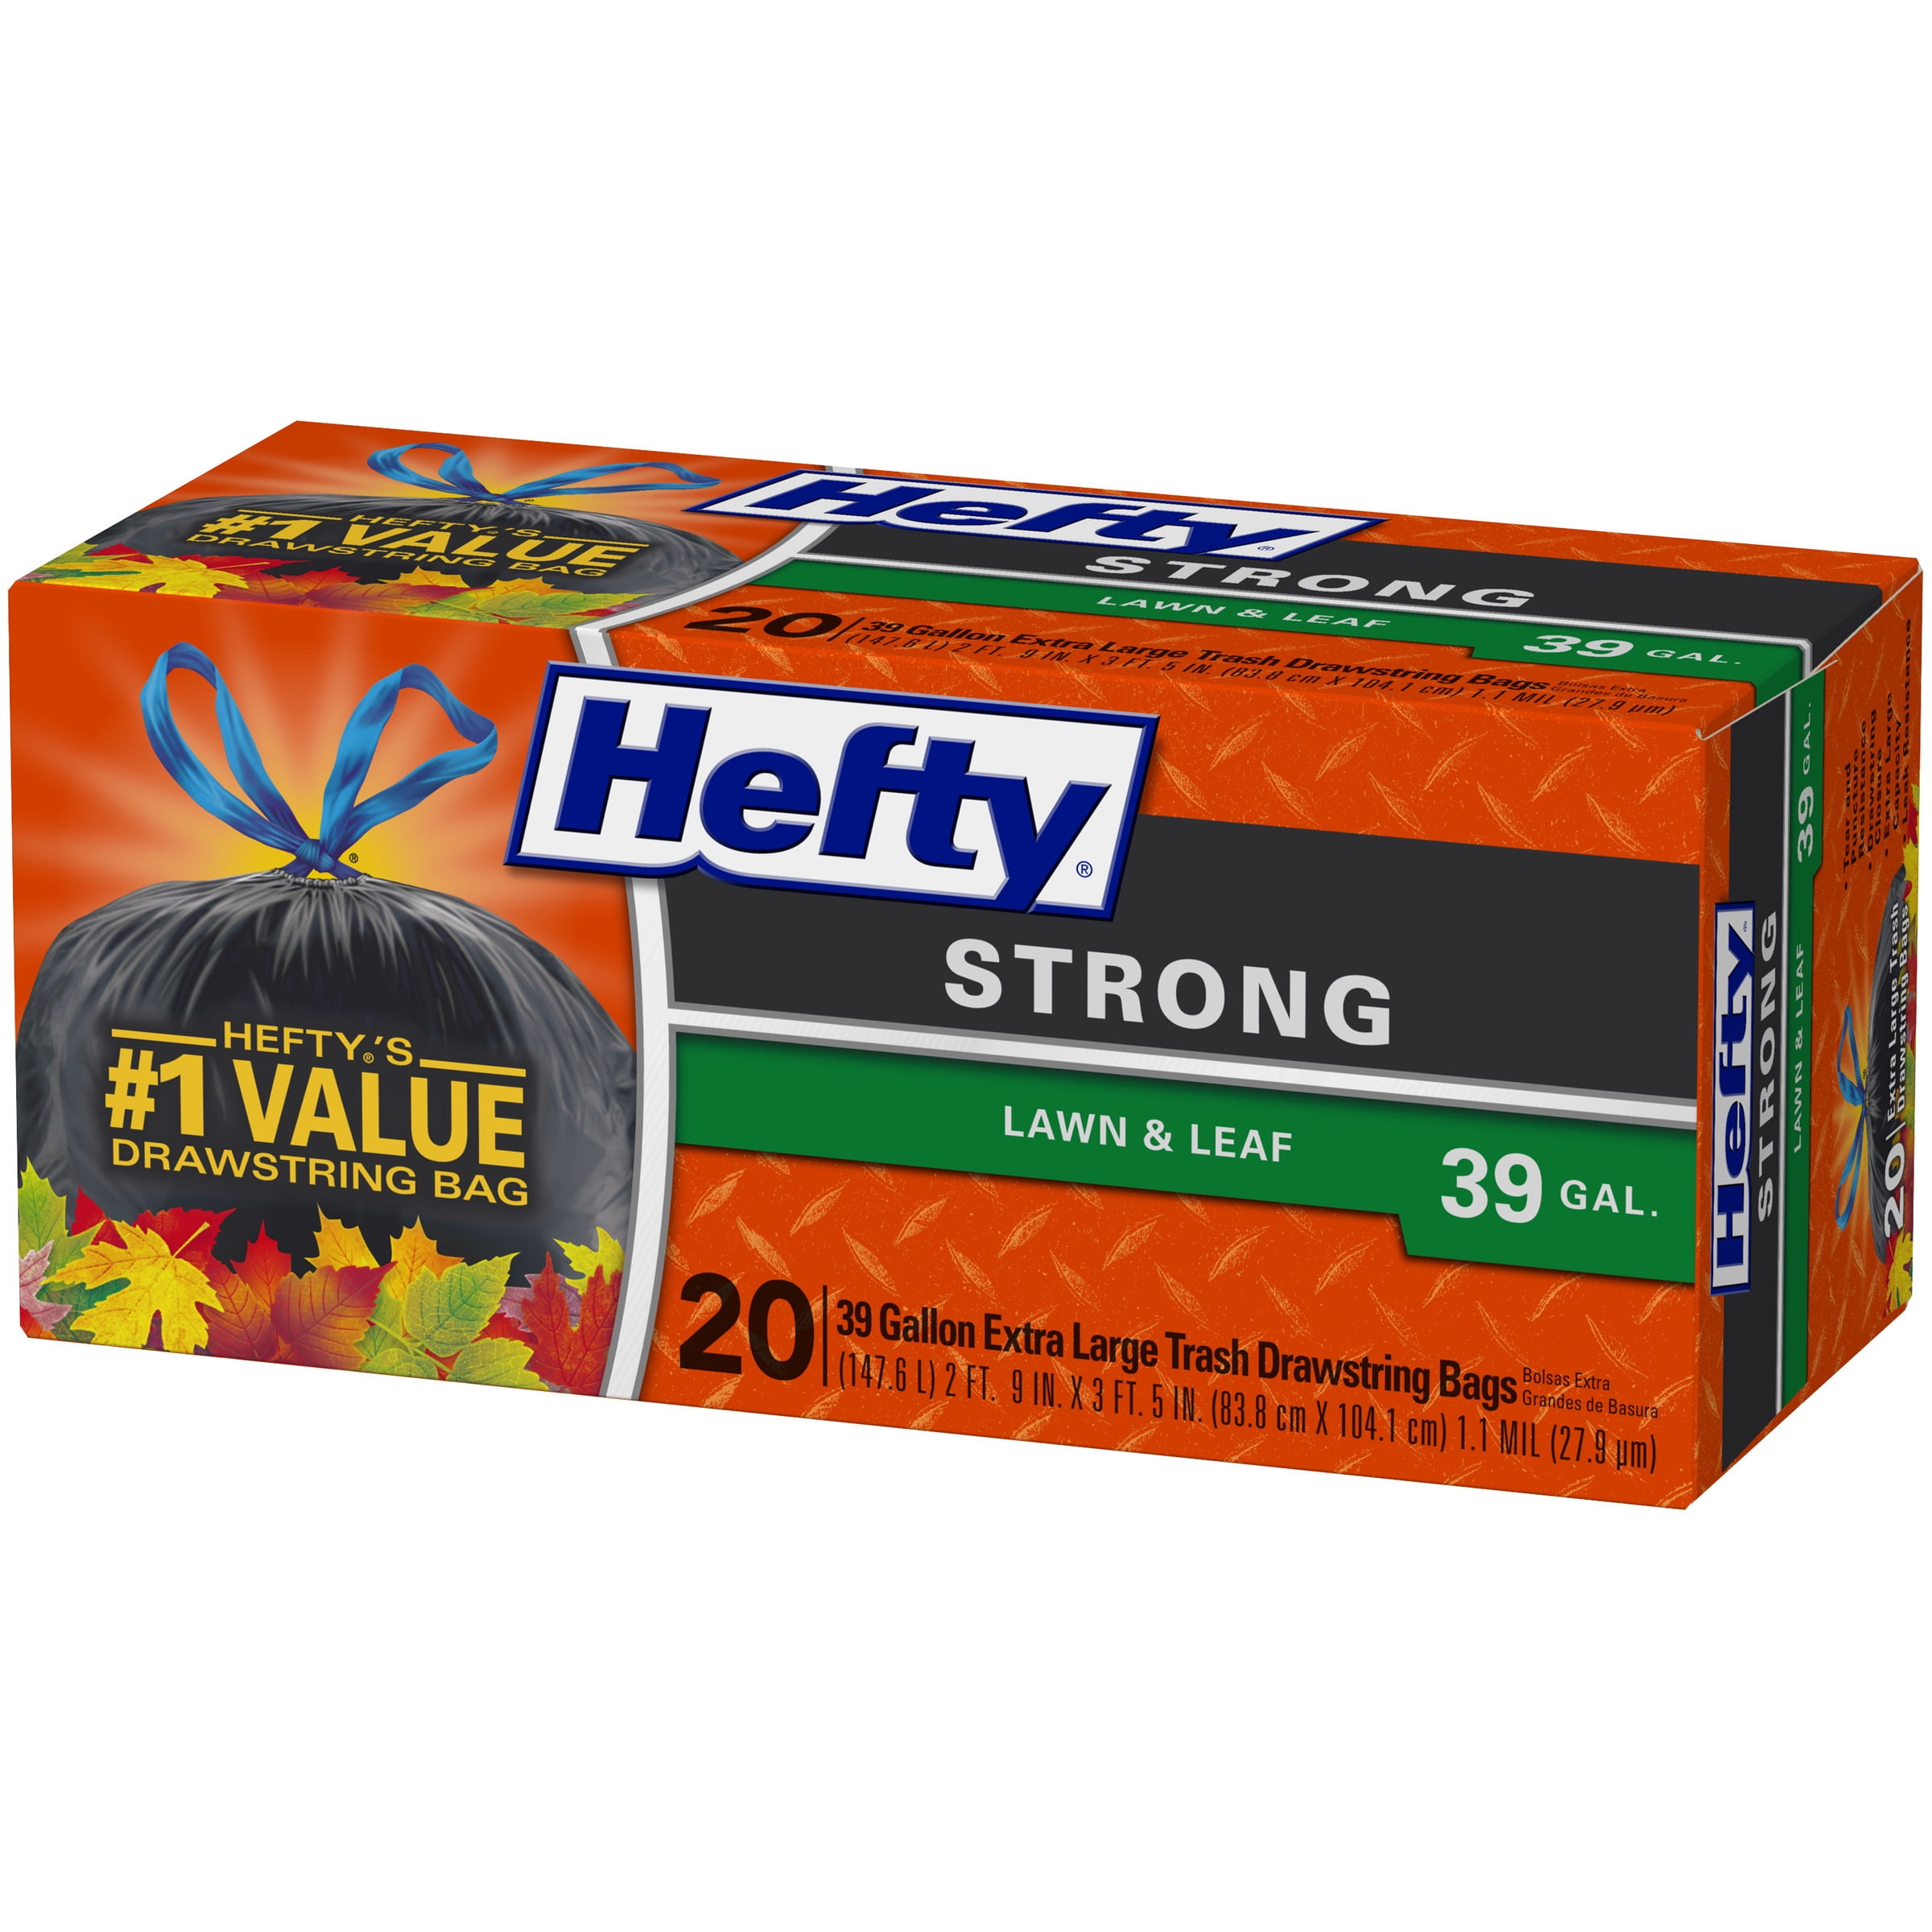 Hefty Extra Strong Extra Large Trash Bags Lawn and Leaf, Drawstring, 39 Gallon Bags, 38 Count 3 